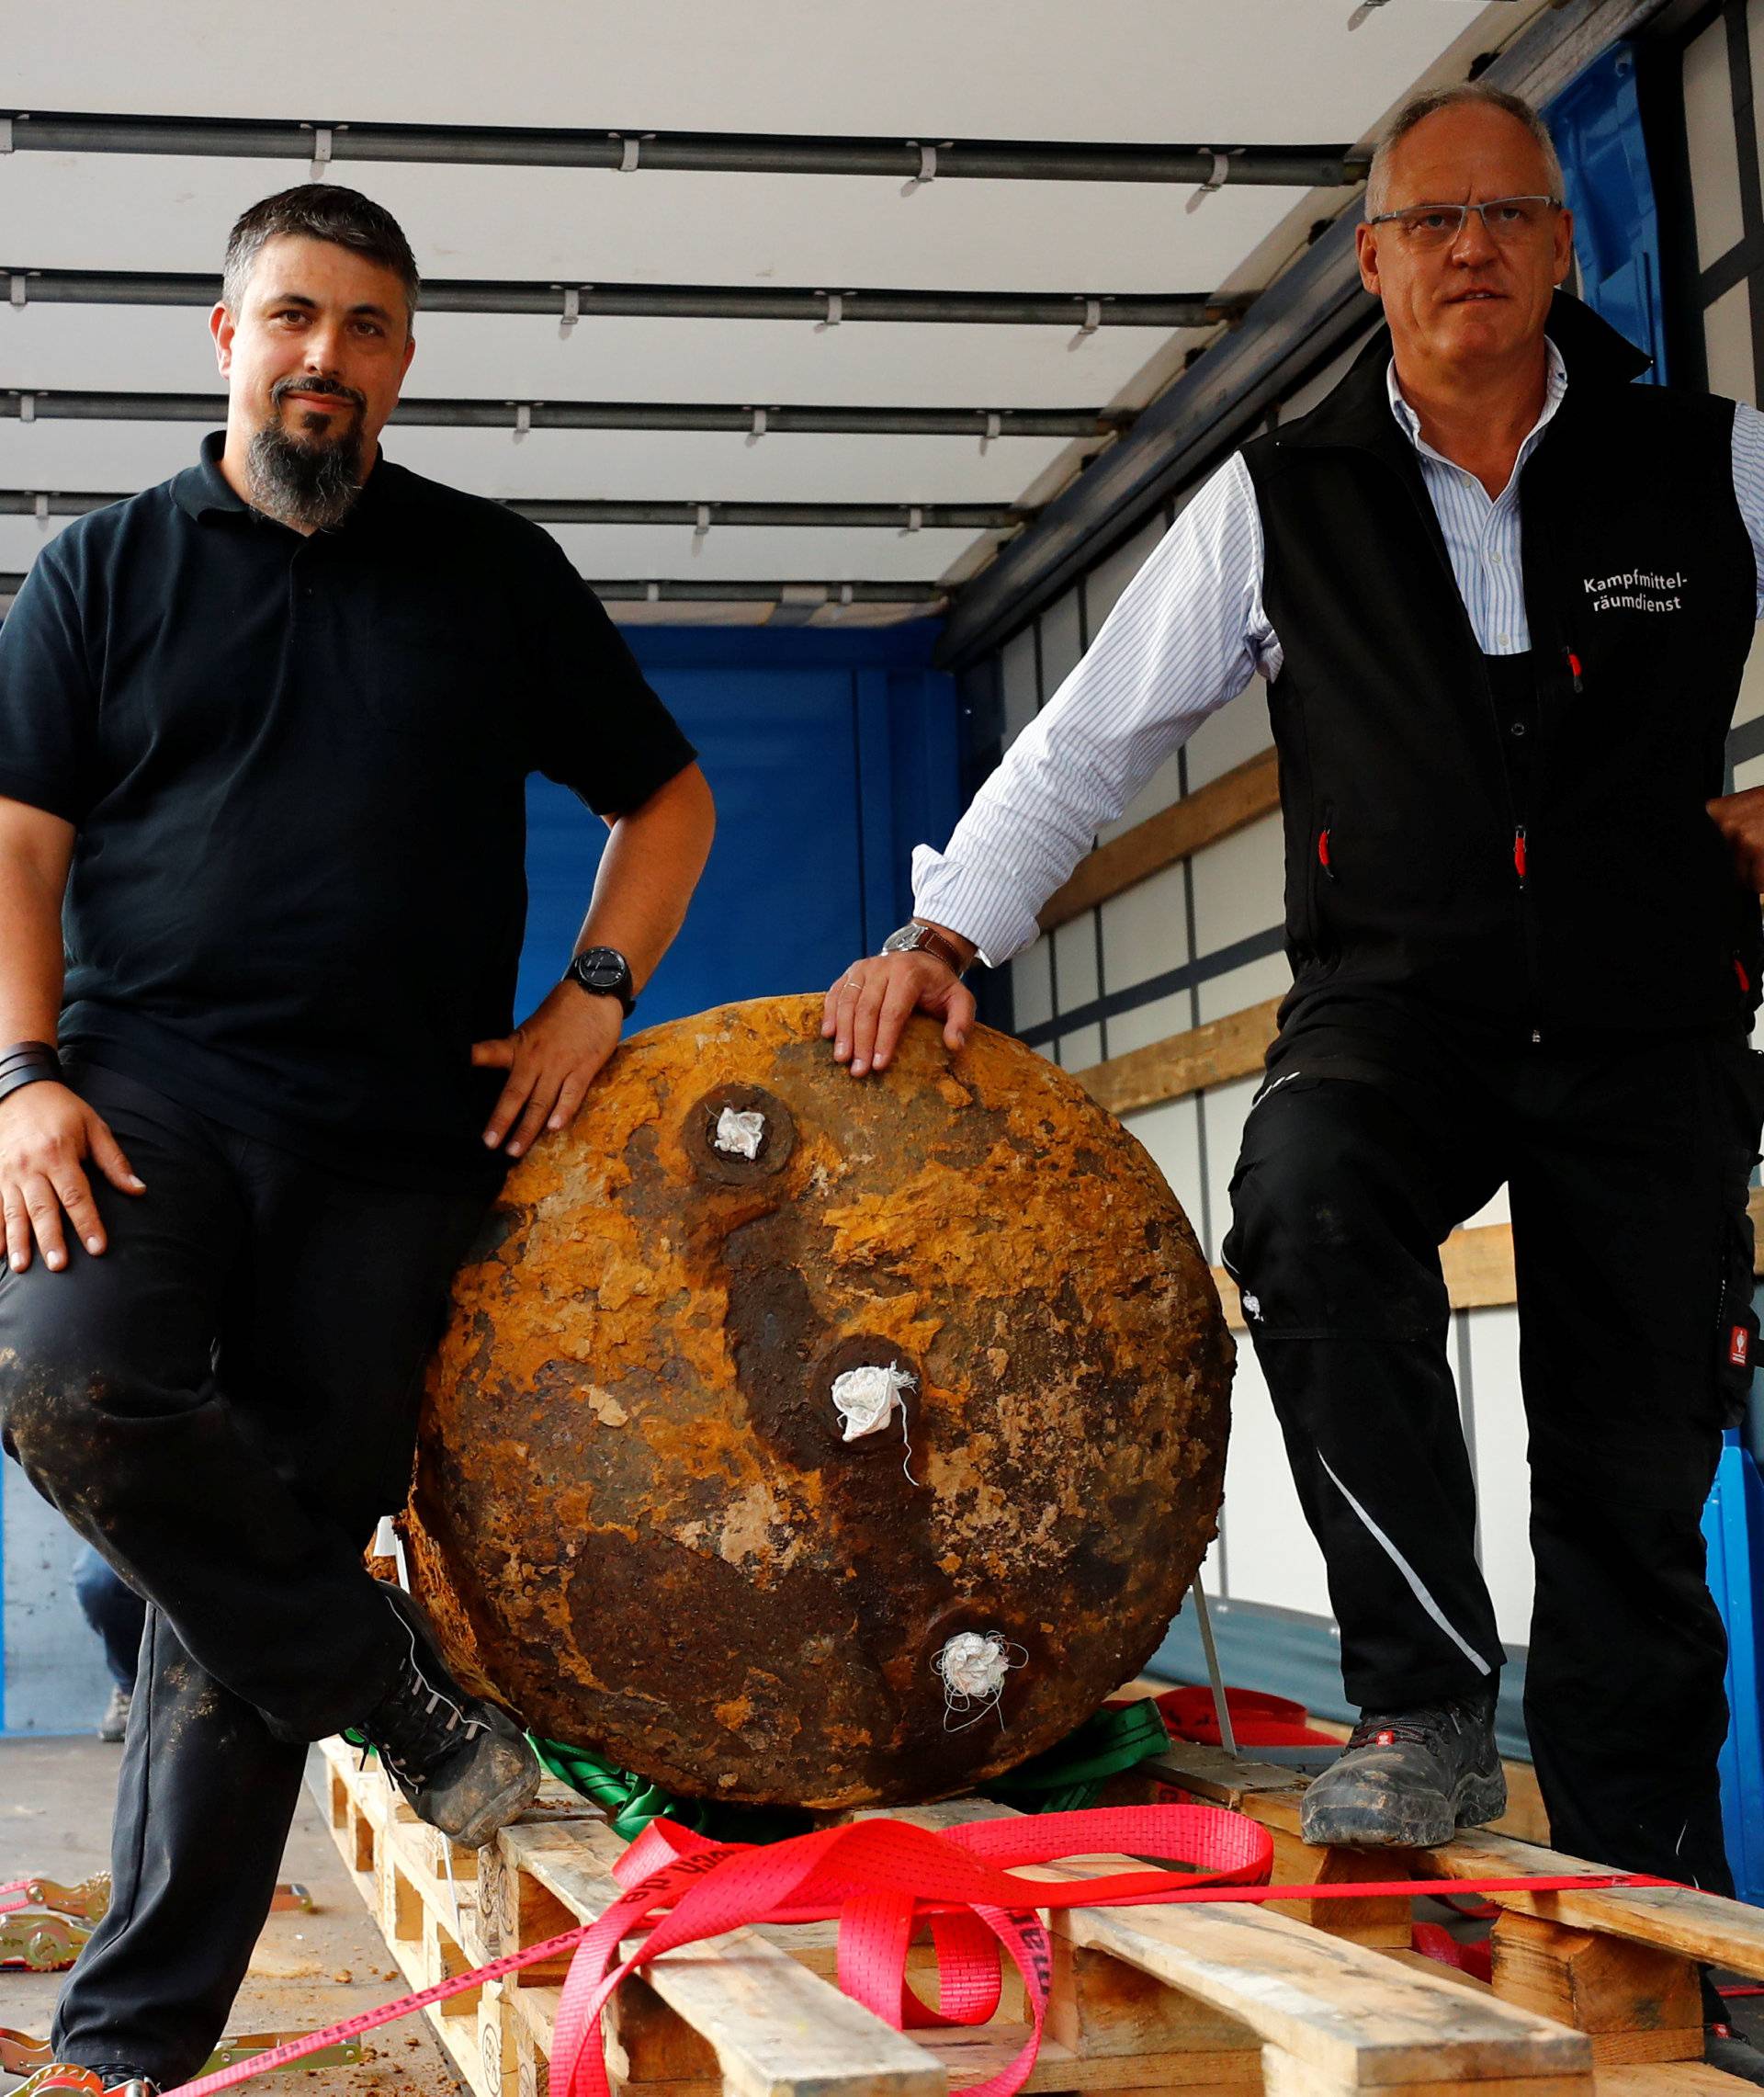 Bomb disposal experts Rene Bennert and Dieter Schweizler pose next to defused massive World War Two bomb after tens of thousands of people evacuated their homes in Frankfurt